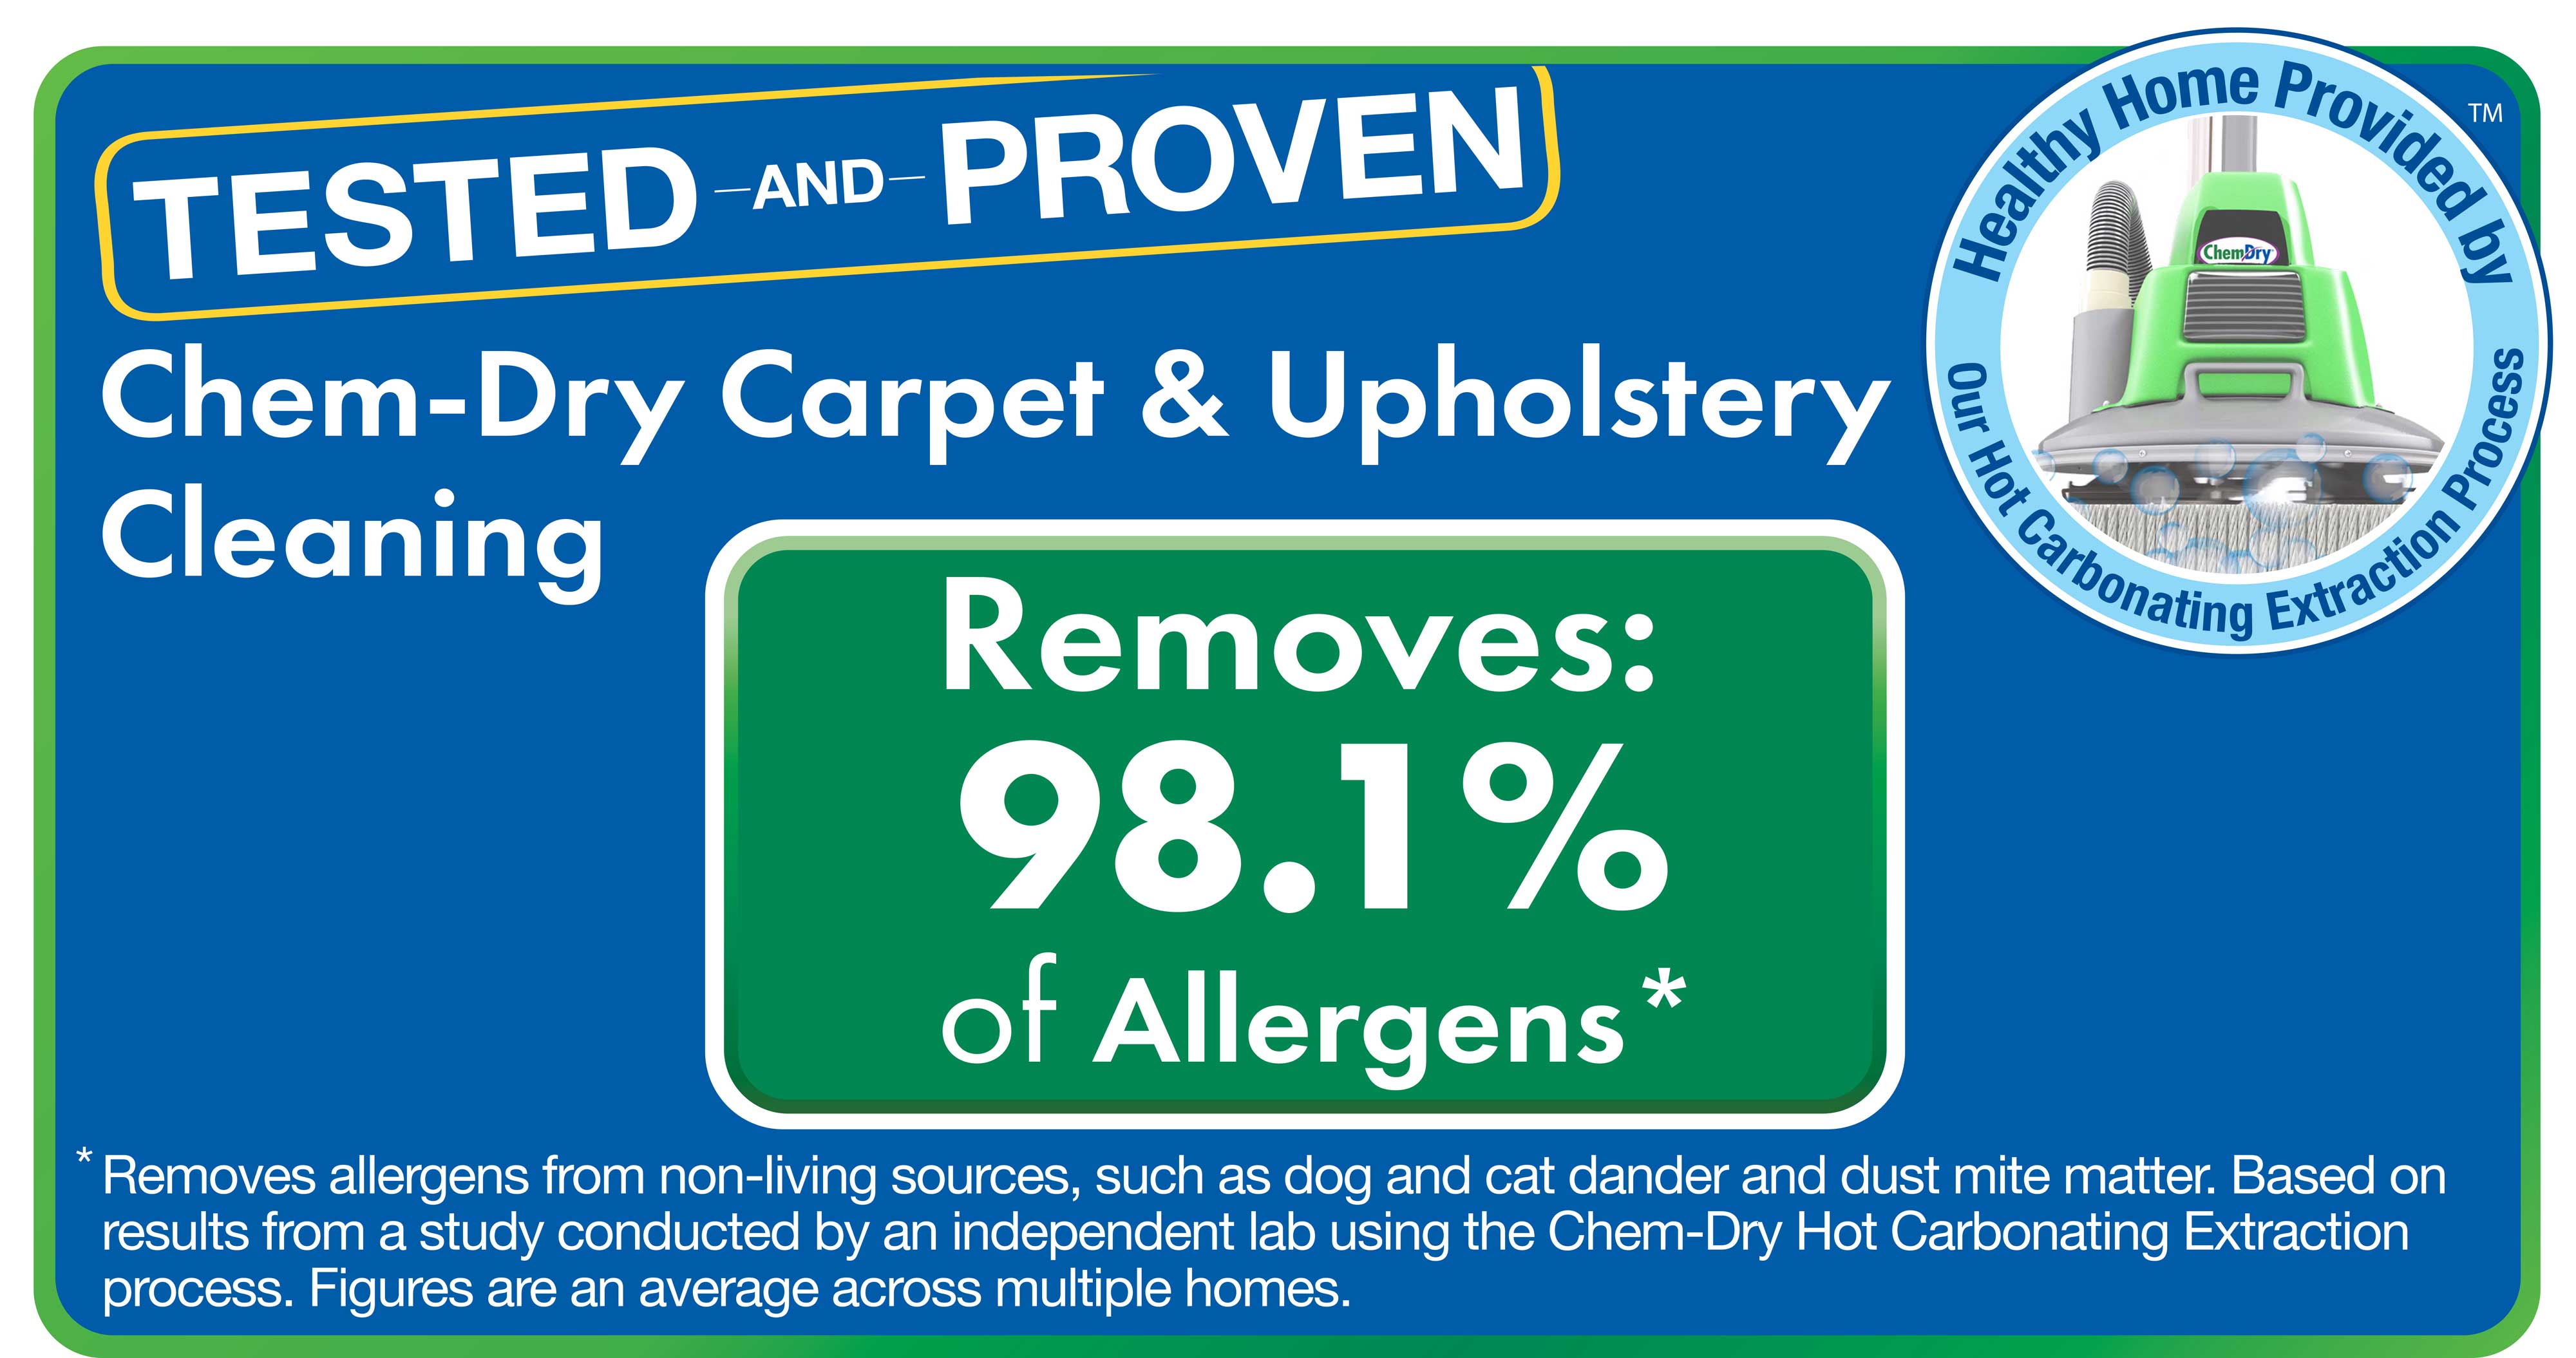 We remove 98% allergens as well as the dirt